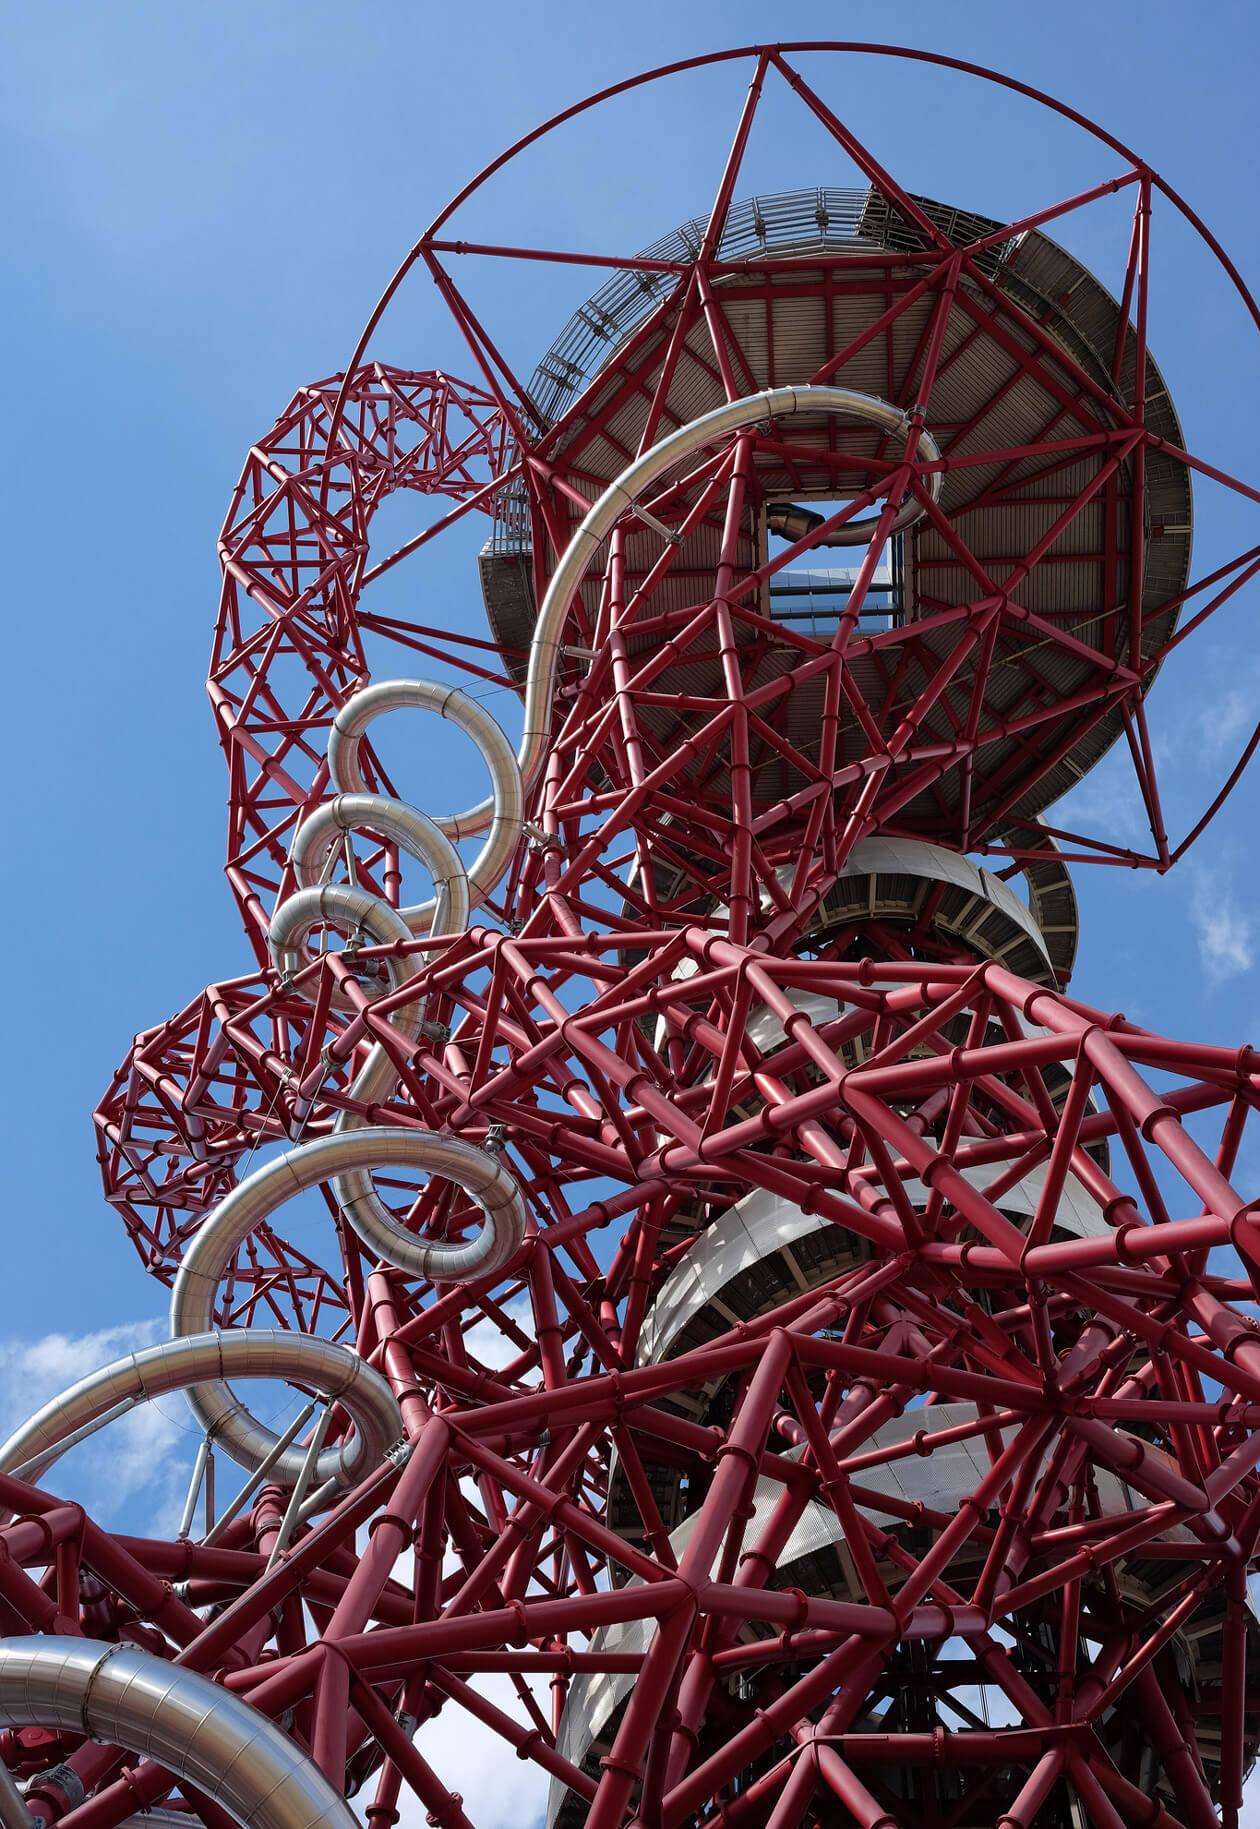 Looking up at the Orbit Slide